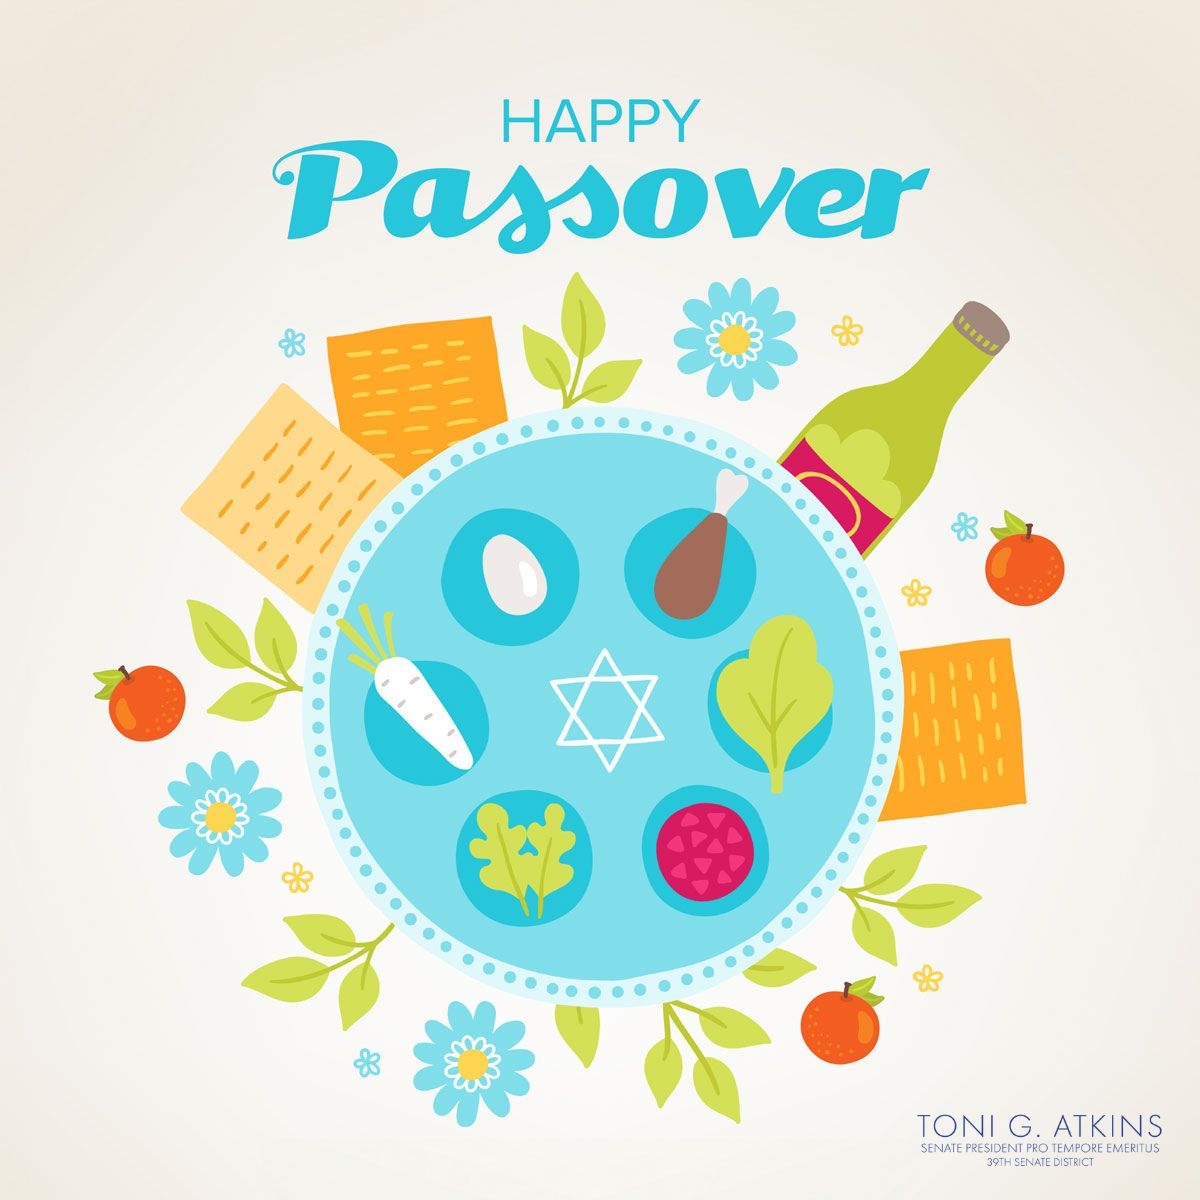 Chag Sameach! Happy #Passover to all who are celebrating!